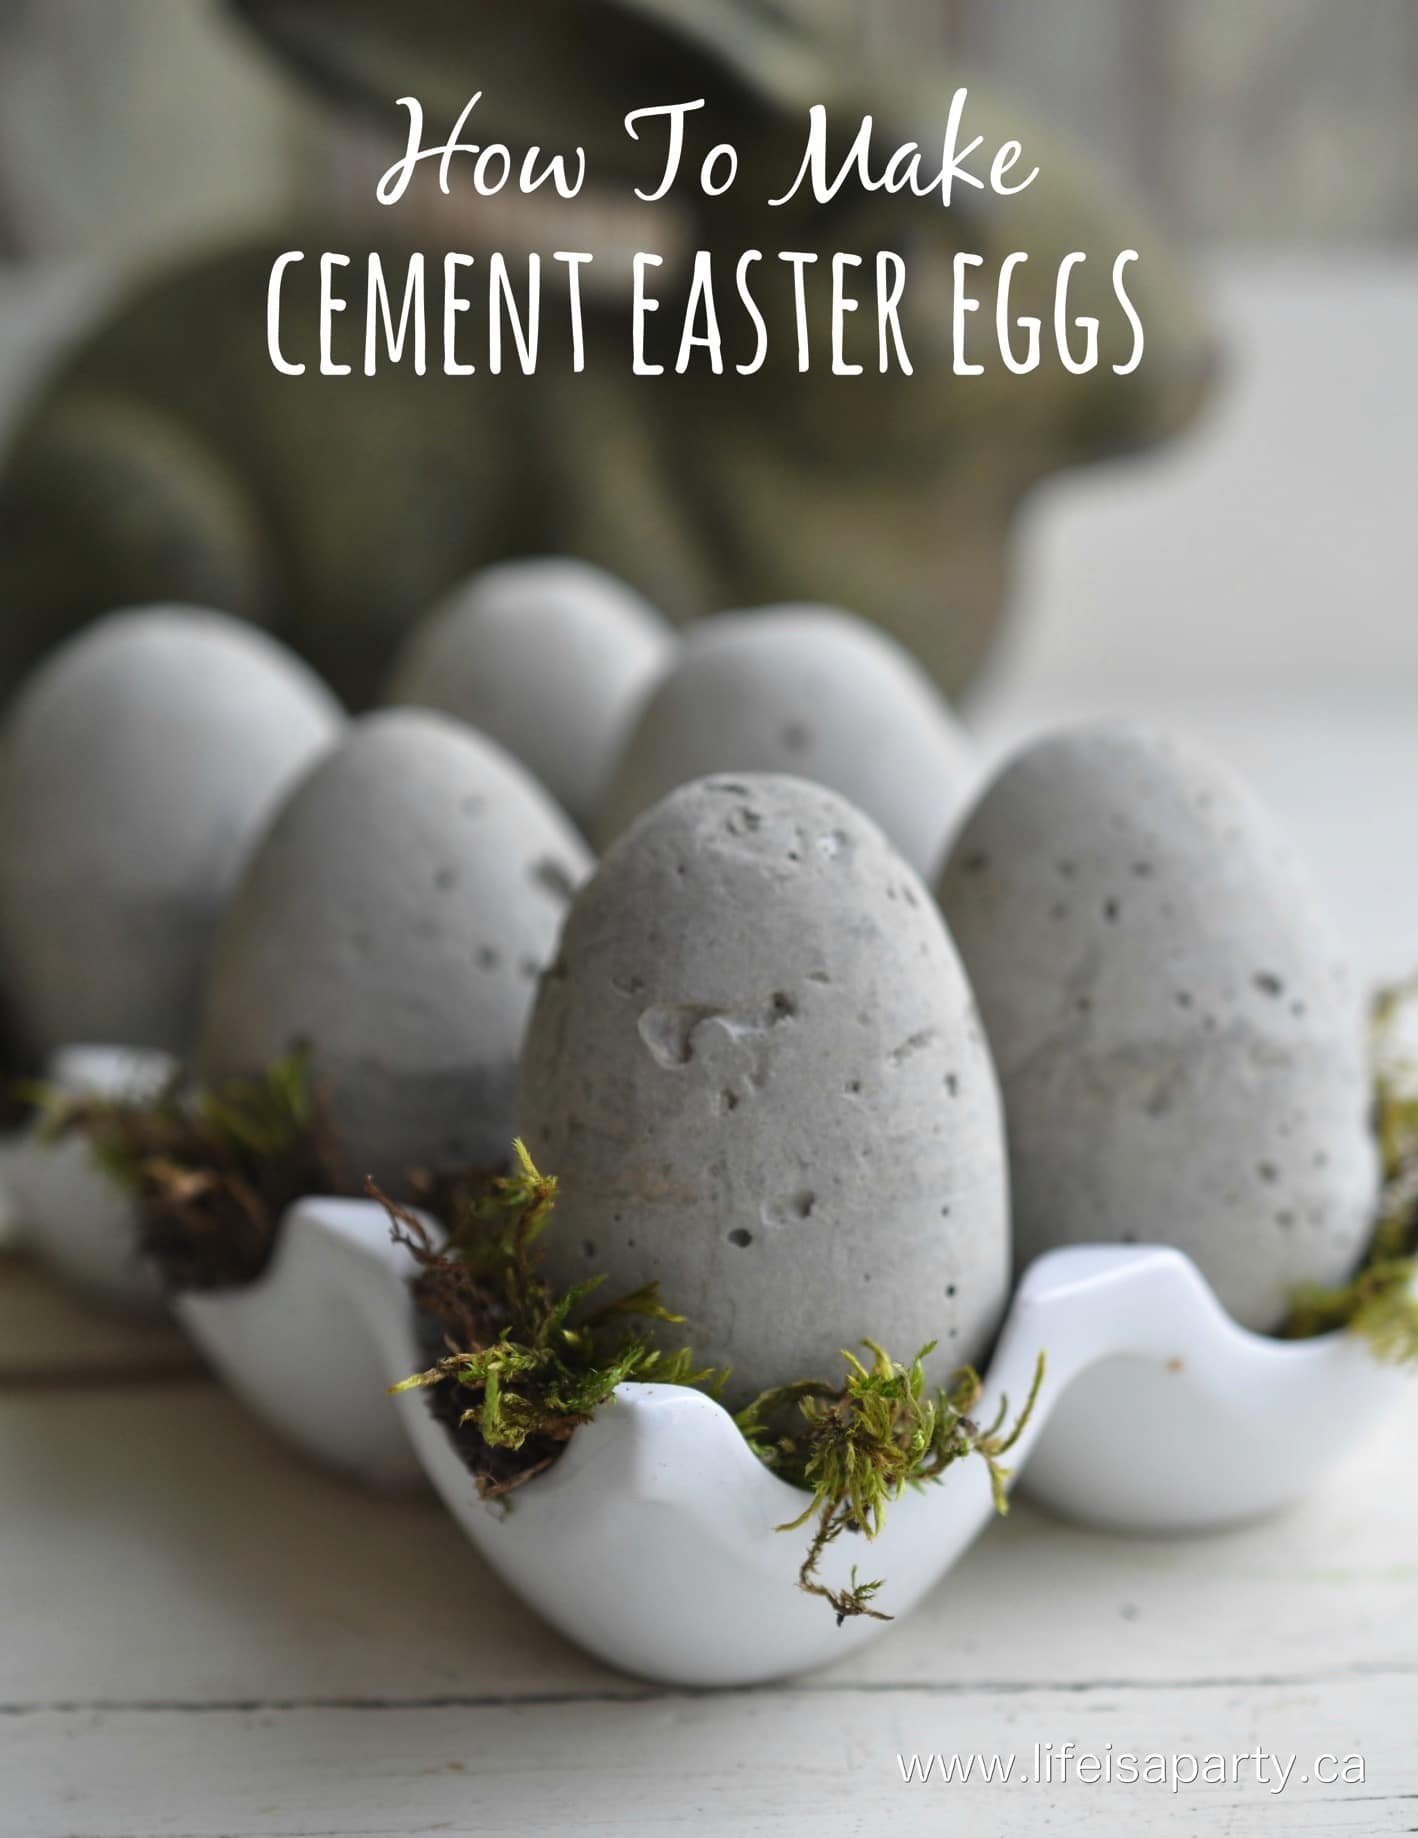 How To Make Cement Easter Eggs